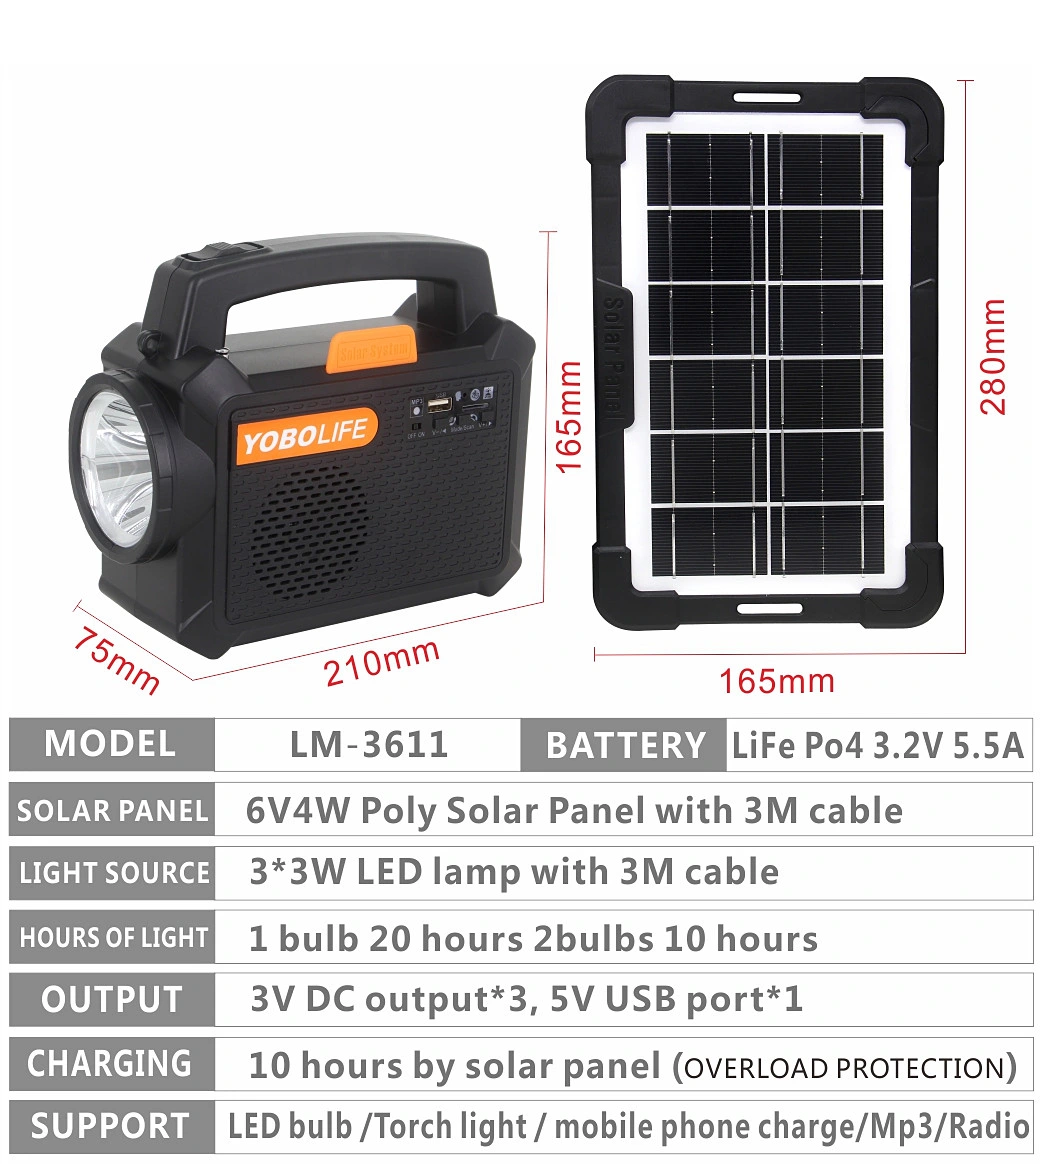 Yobolife Portable Mini Solar Power Lighting System Kits for Home with Music Speaker Solarenergie Systems 2 in 1